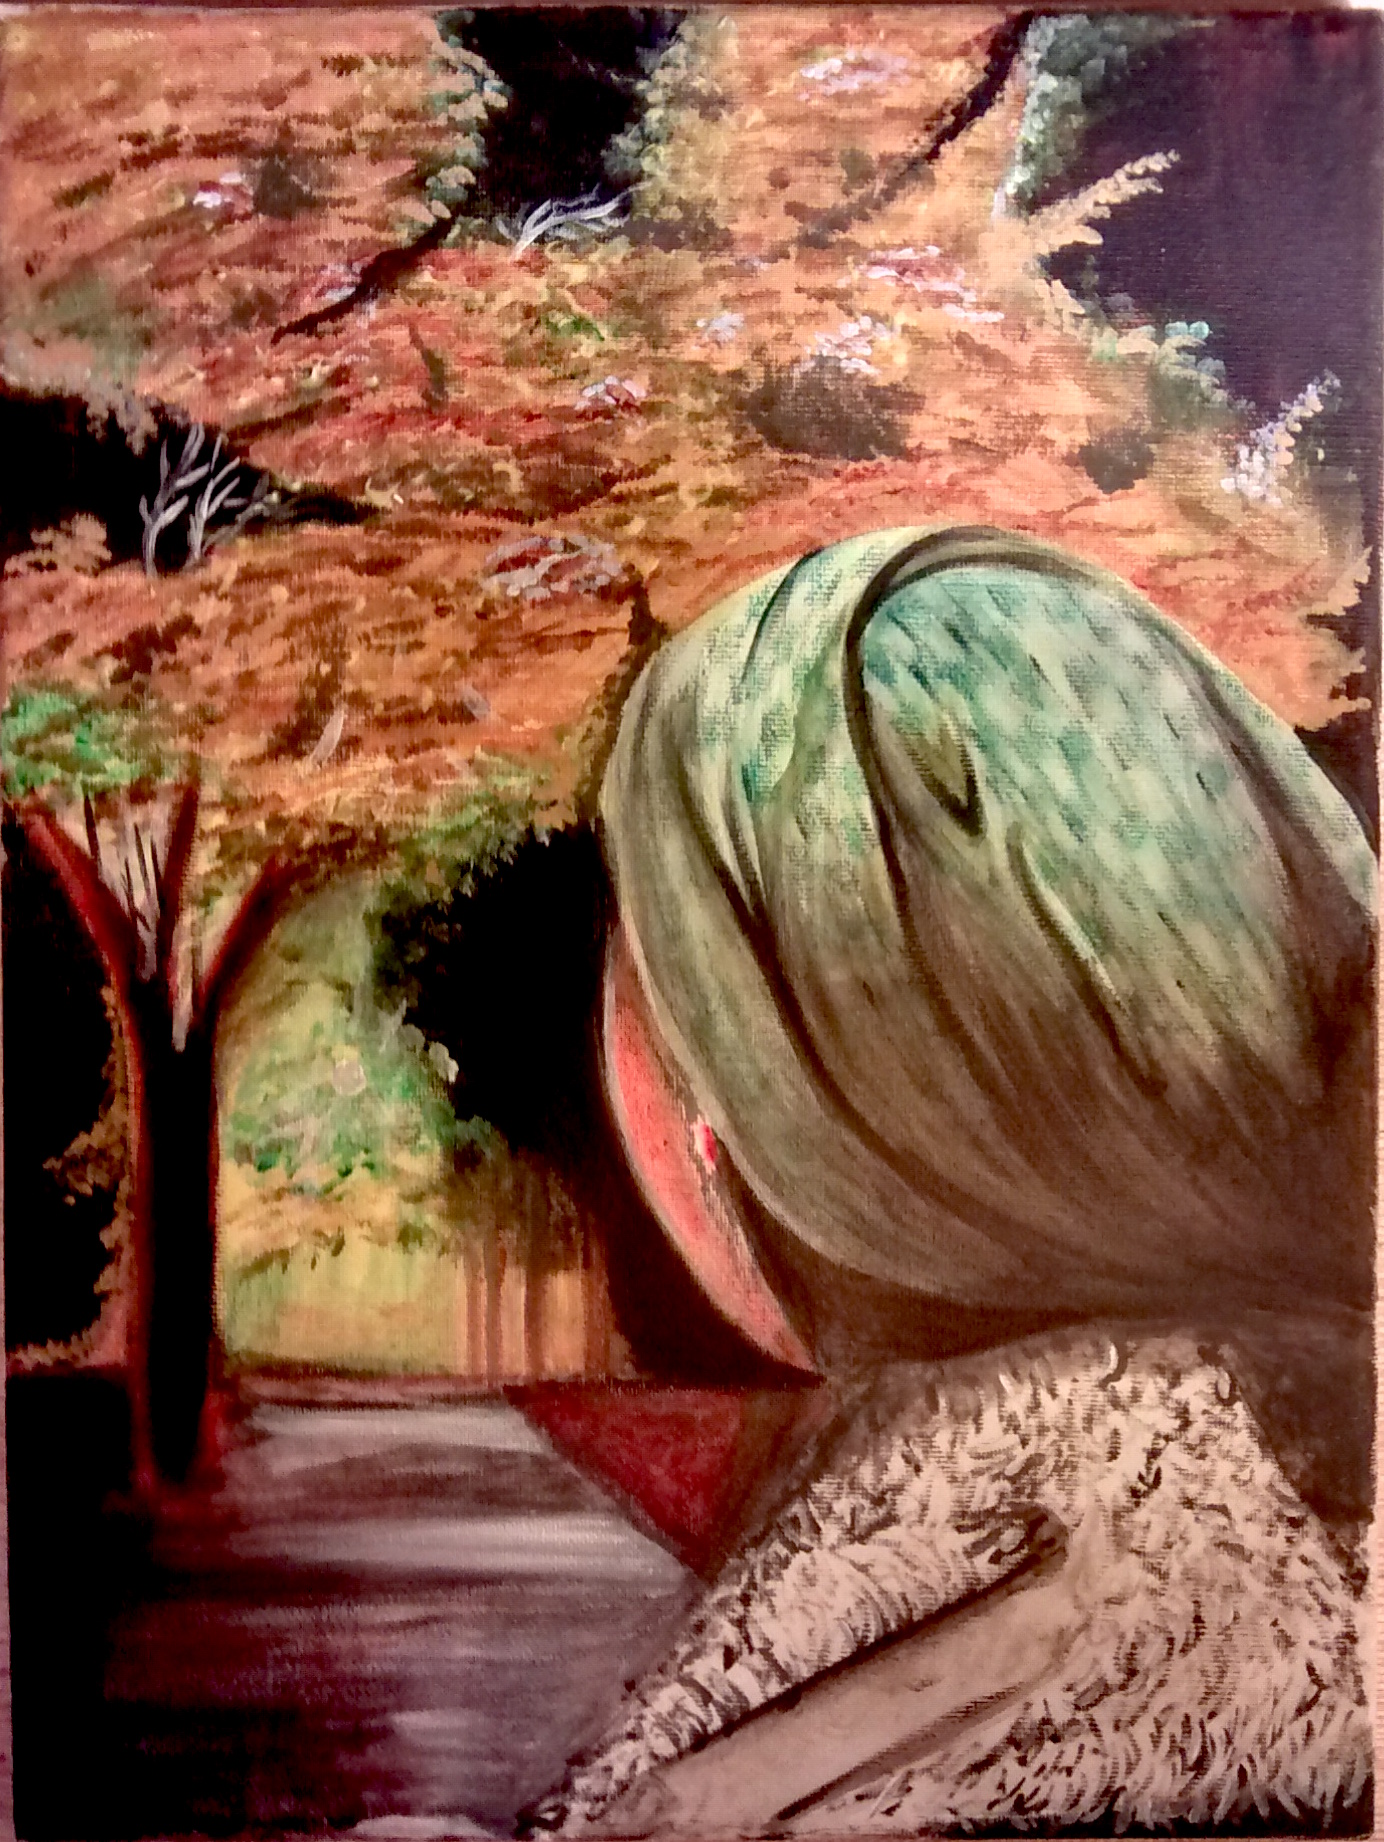 "Autumn Reverie" acrylic on canvas submitted for display at art exhibit in Yoni Ki Baat (2017)